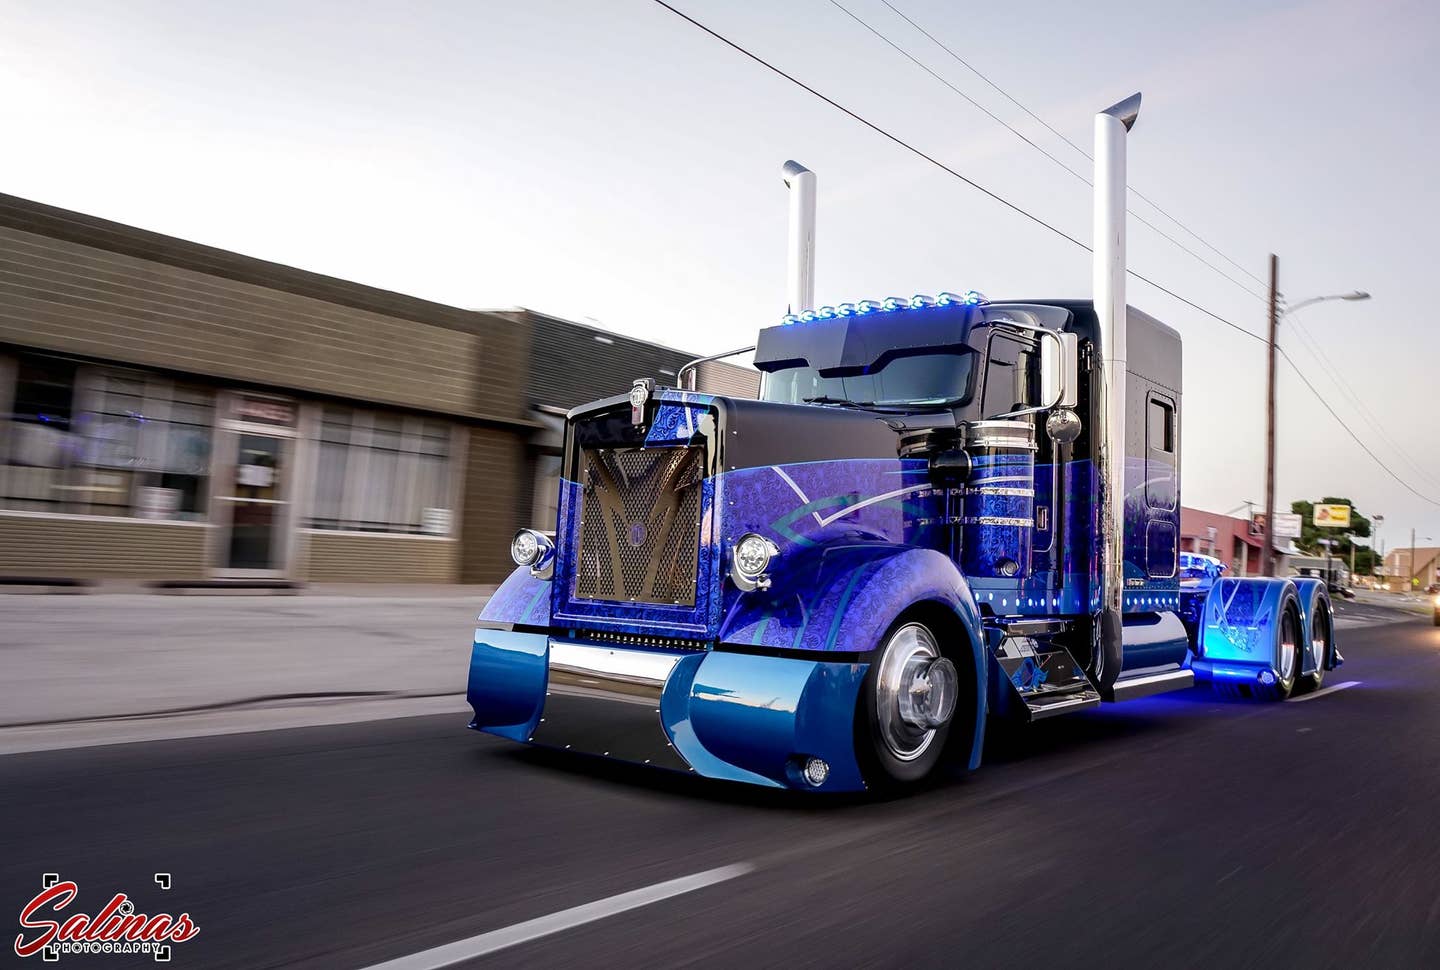 You’ve Never Seen a Big Rig Like This